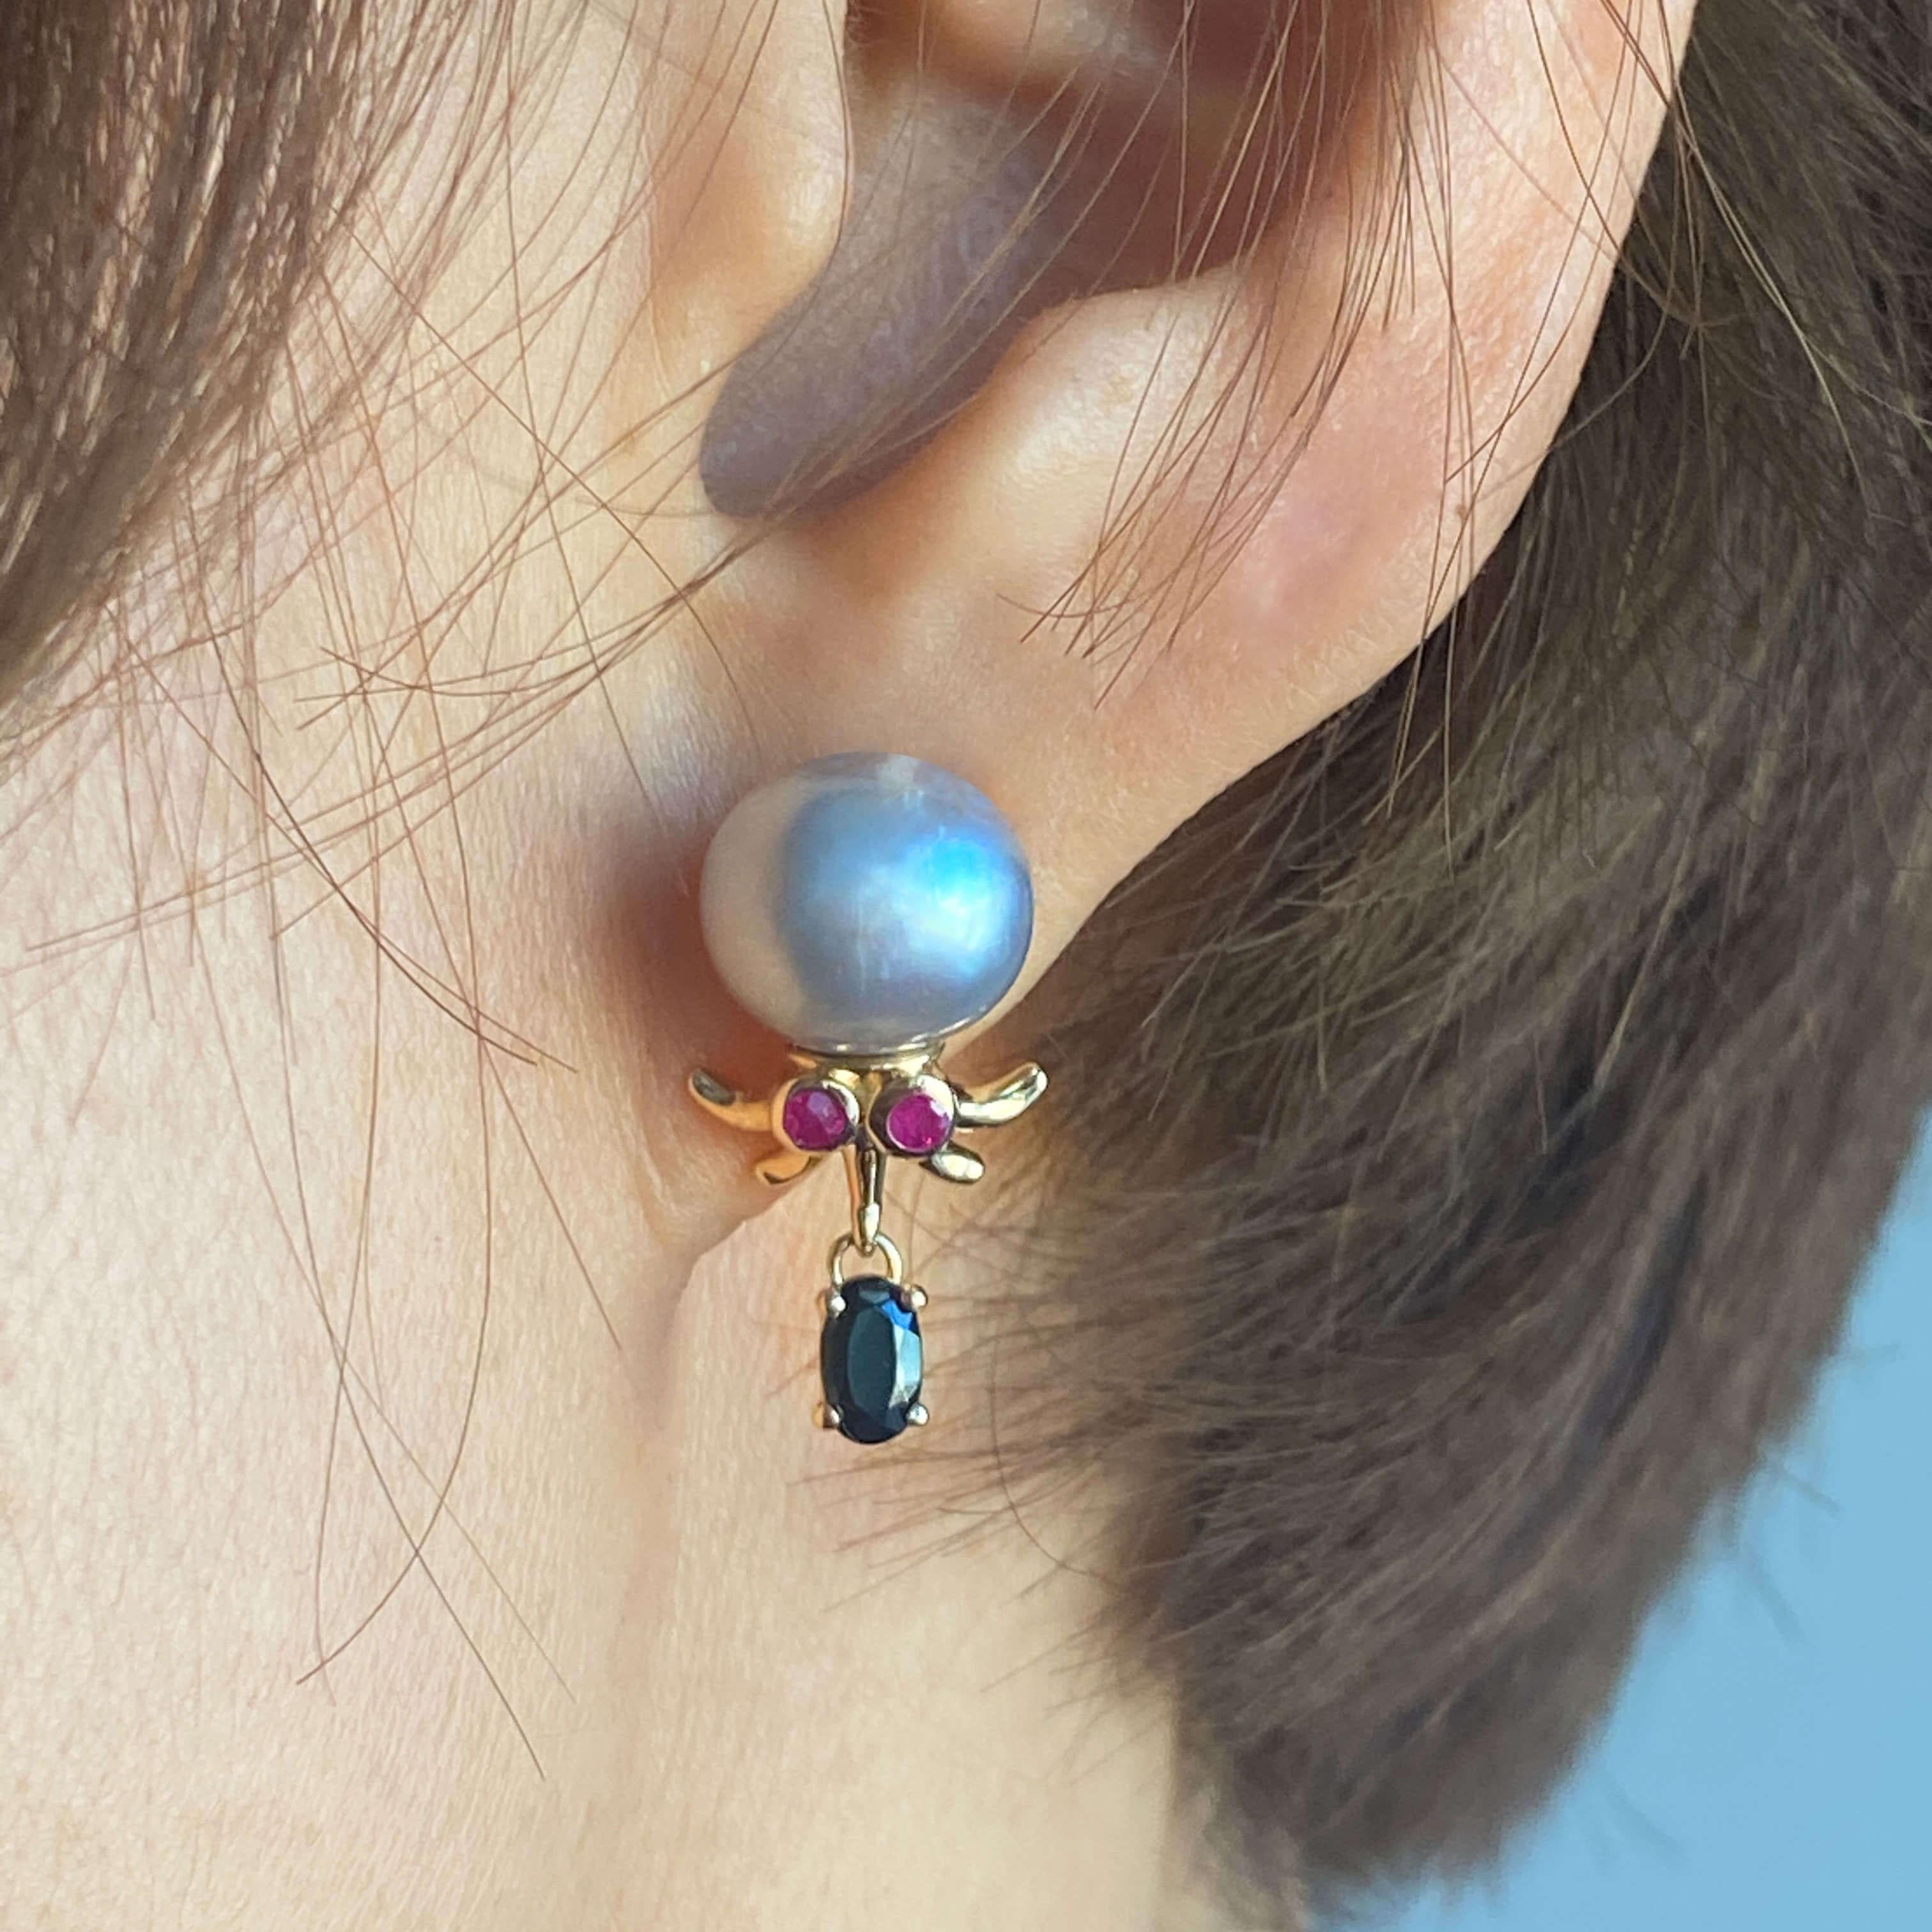 Are you tired of wearing the same old boring earrings that everyone else has? Do you want to spice up your look with something unique and fun? Do you love the ocean and its amazing creatures?
If you answered yes to any of these questions, then you